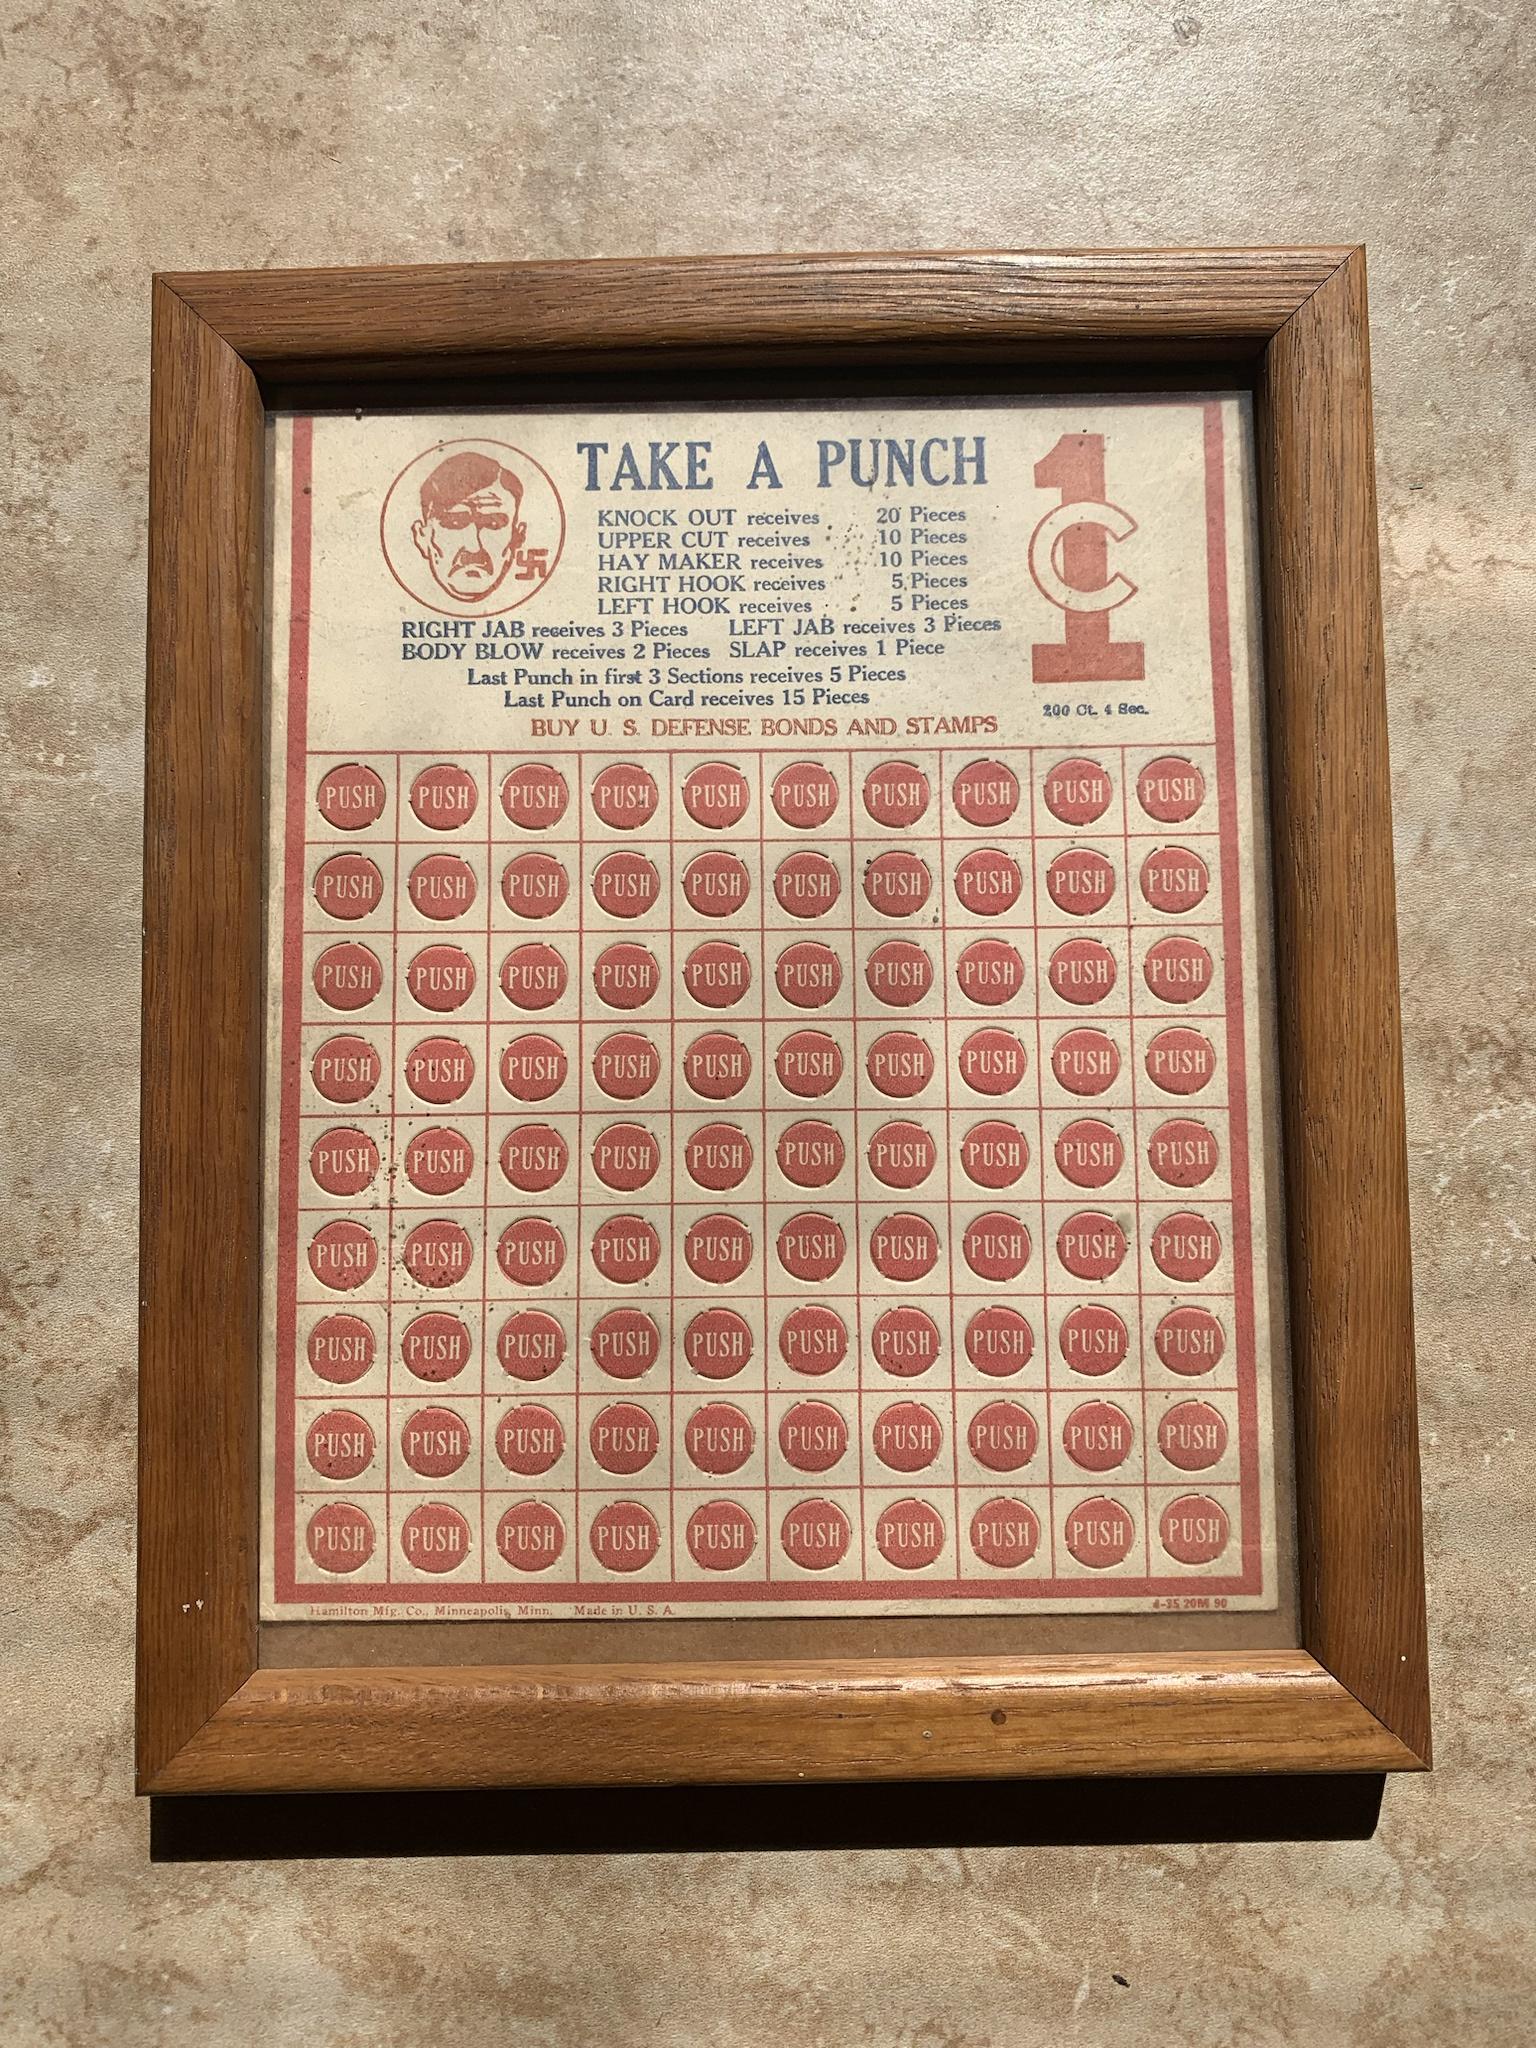 WW2 Generation “Choose a Punch at Hitler” US Protection Bonds Punch Board Game.